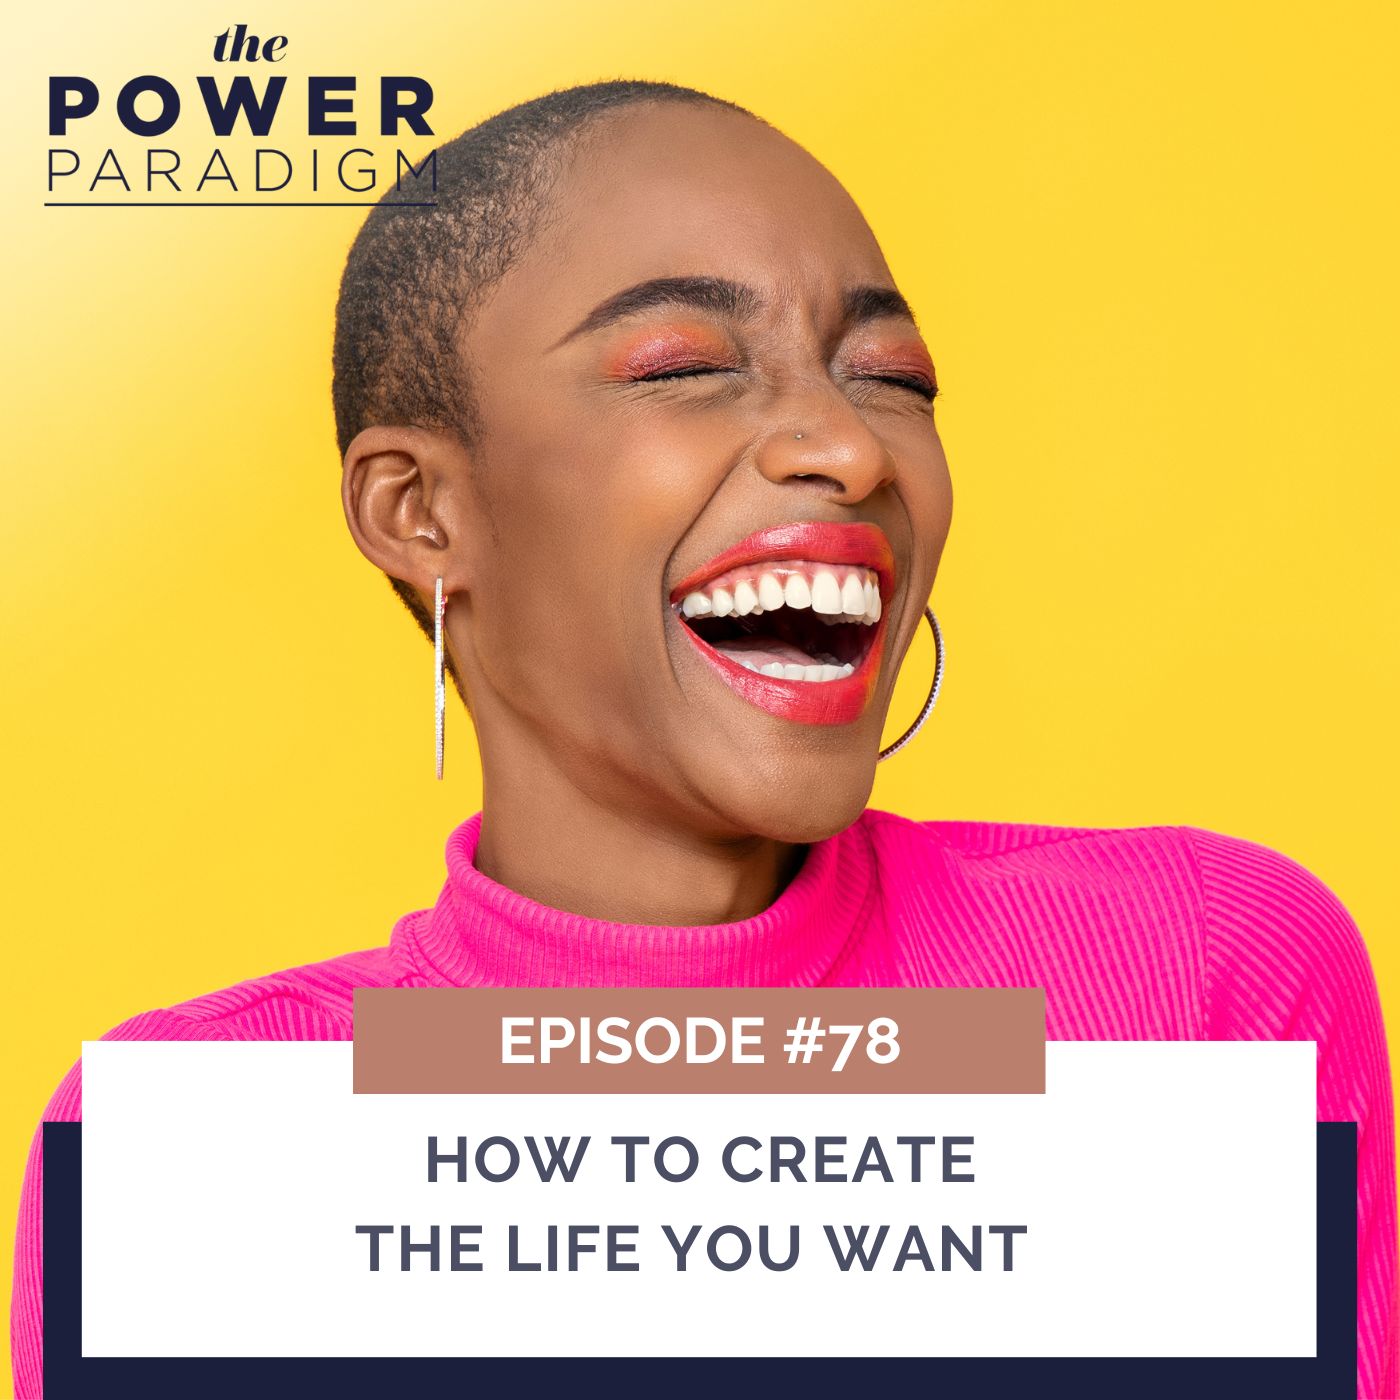 The Power Paradigm™ | How to Create the Life You Want